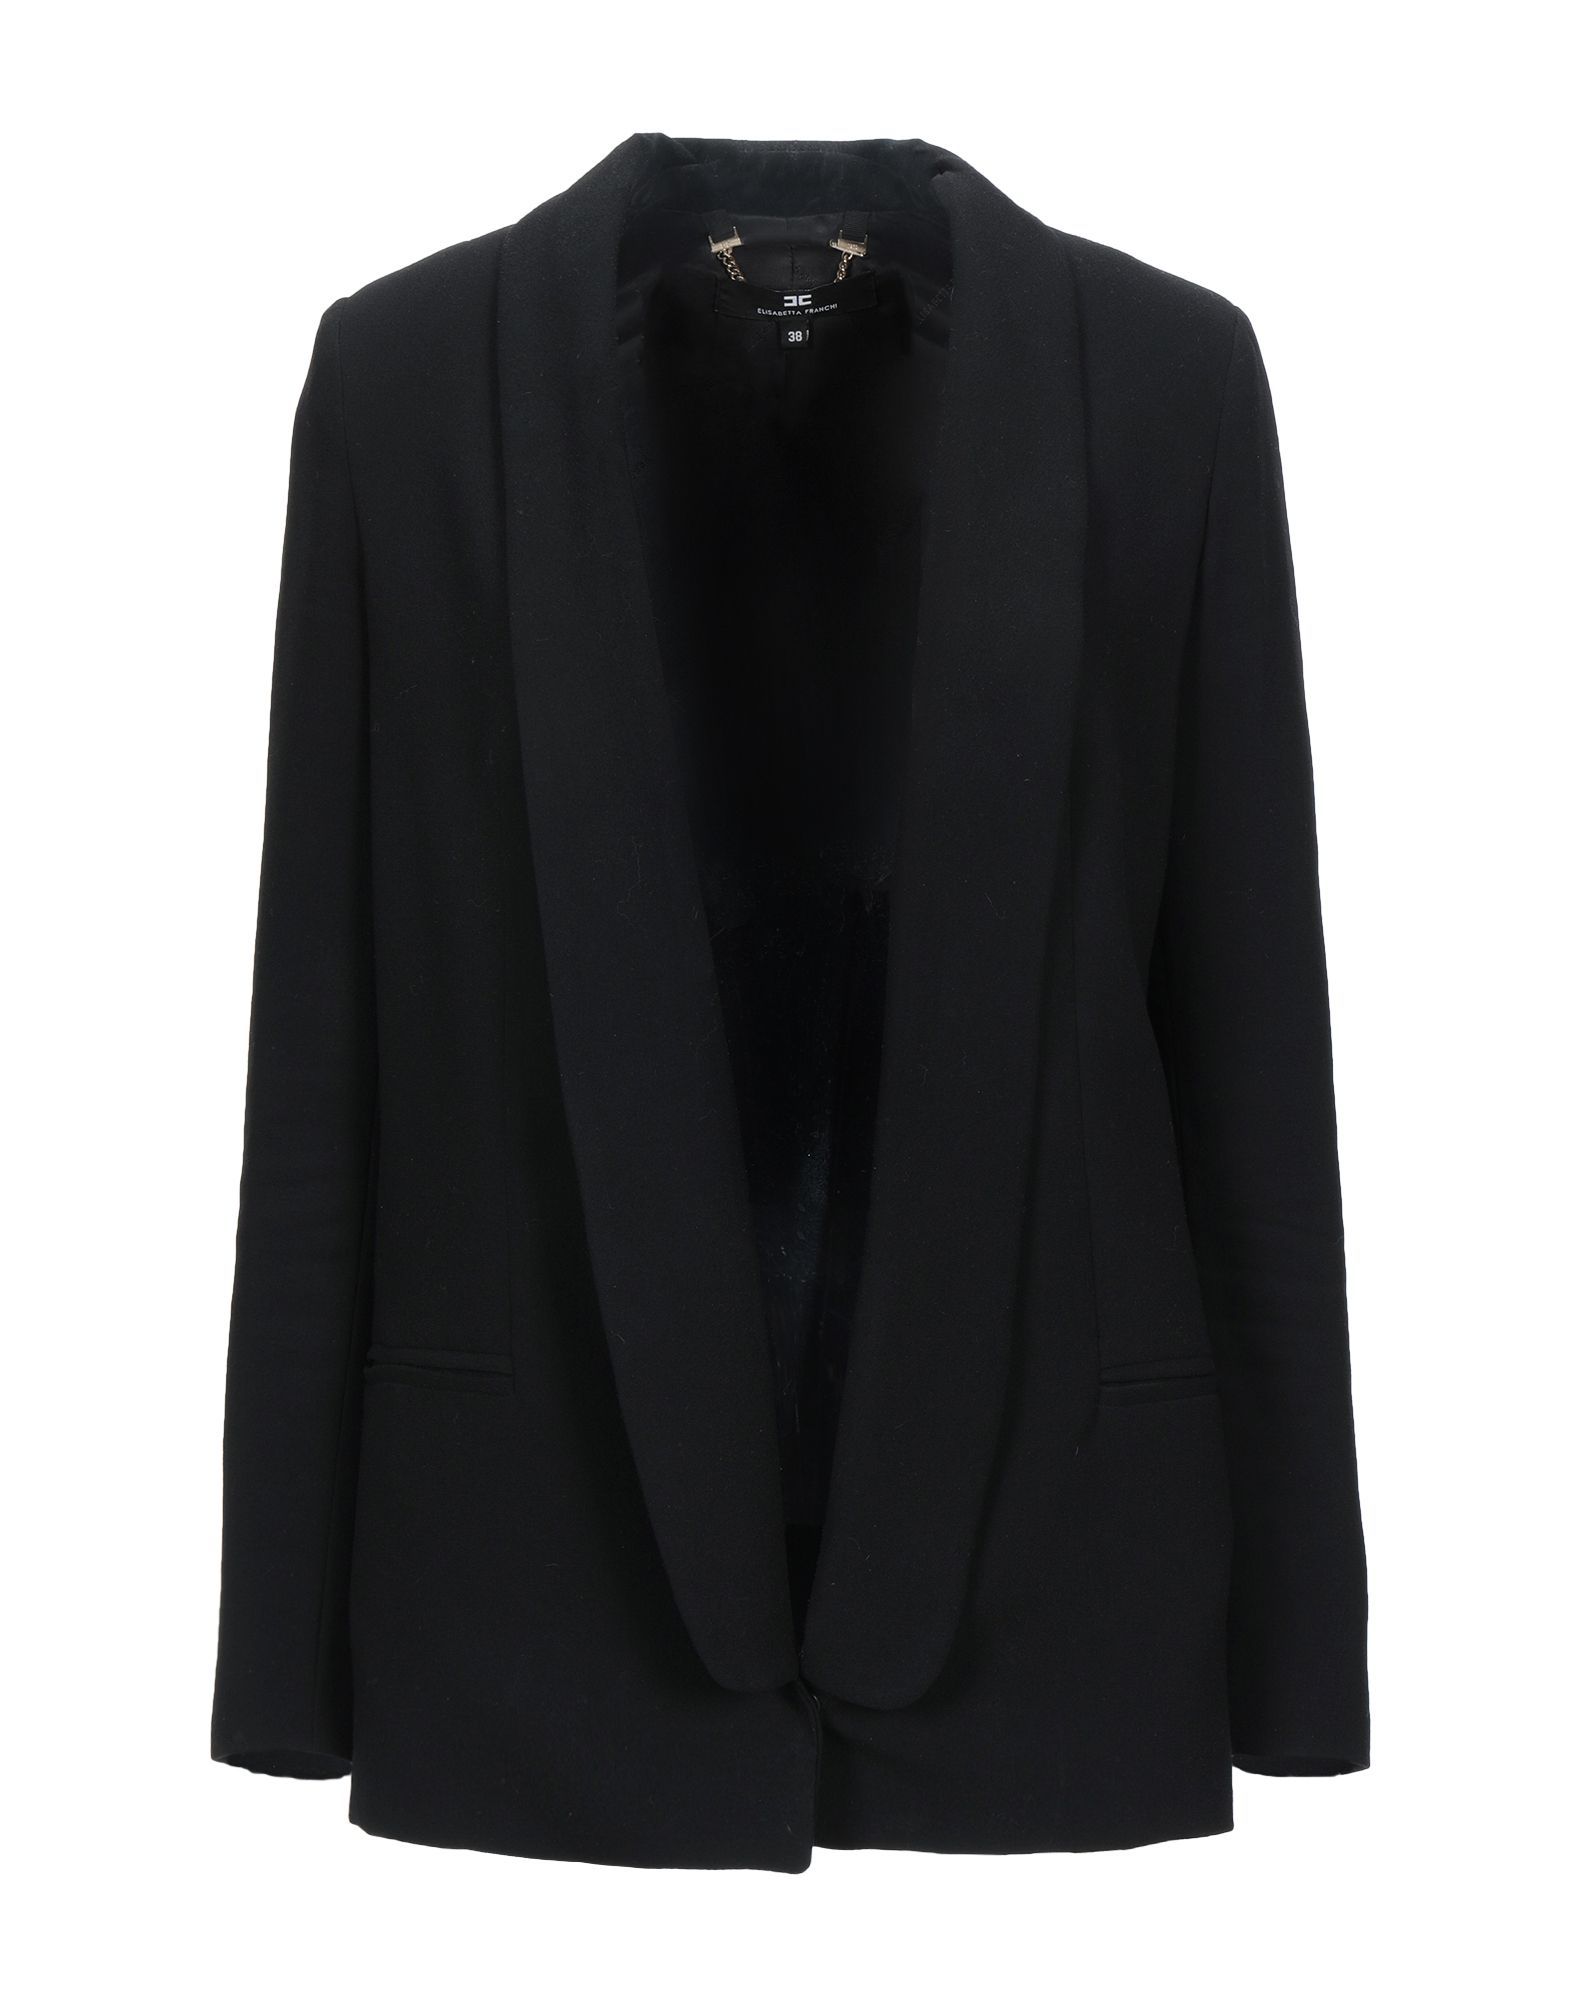 crepe, darts, basic solid colour, no pockets, snap buttons fastening, lapel collar, single-breasted , long sleeves, fully lined